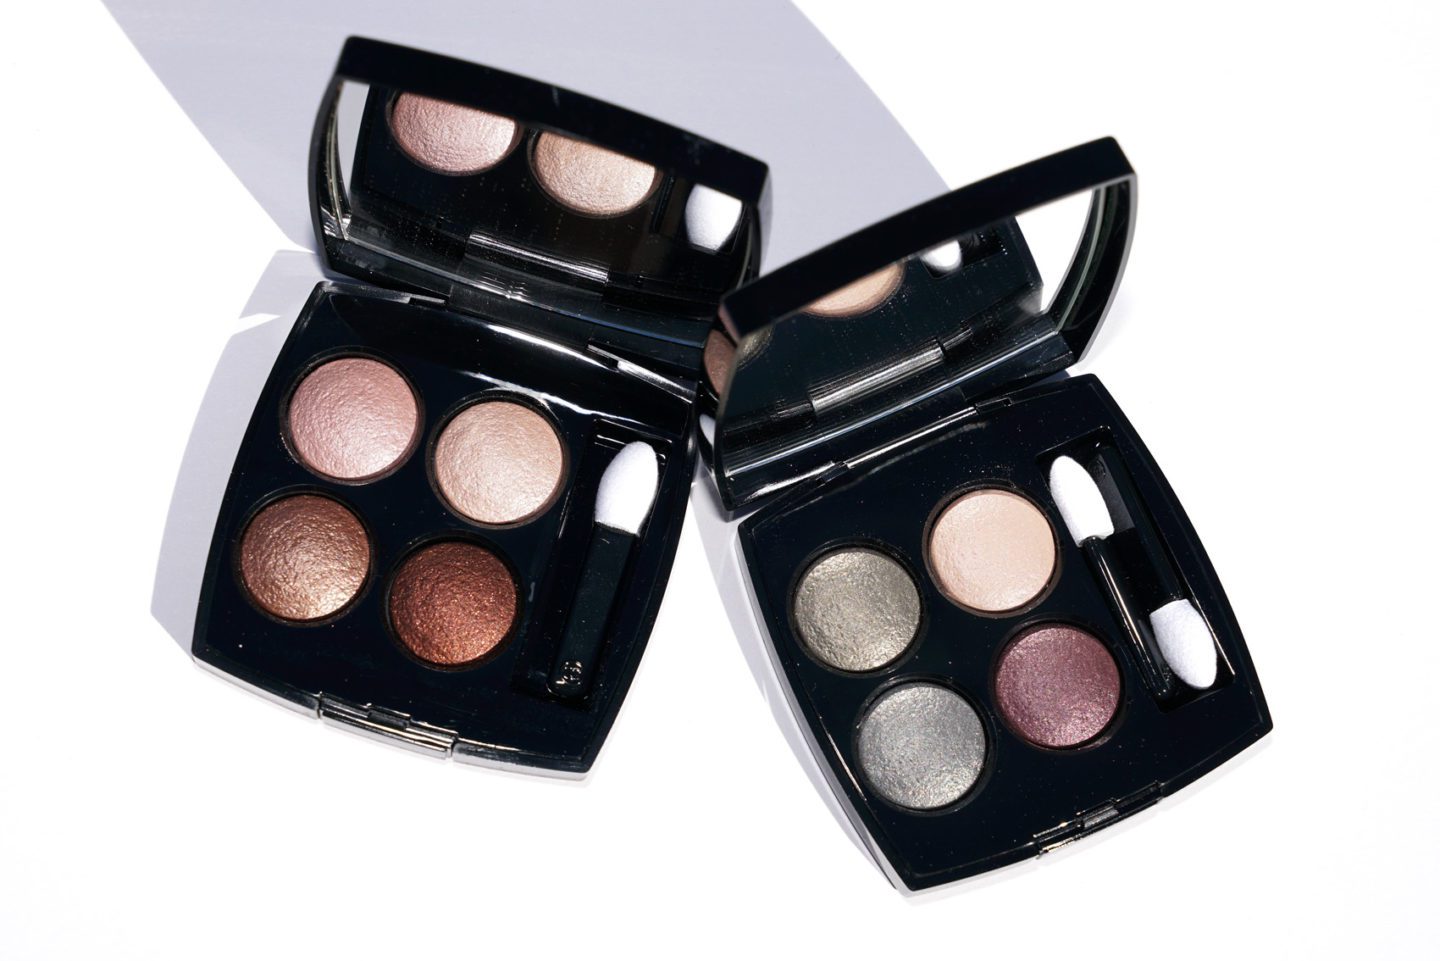 chanel les 4 ombres tweed